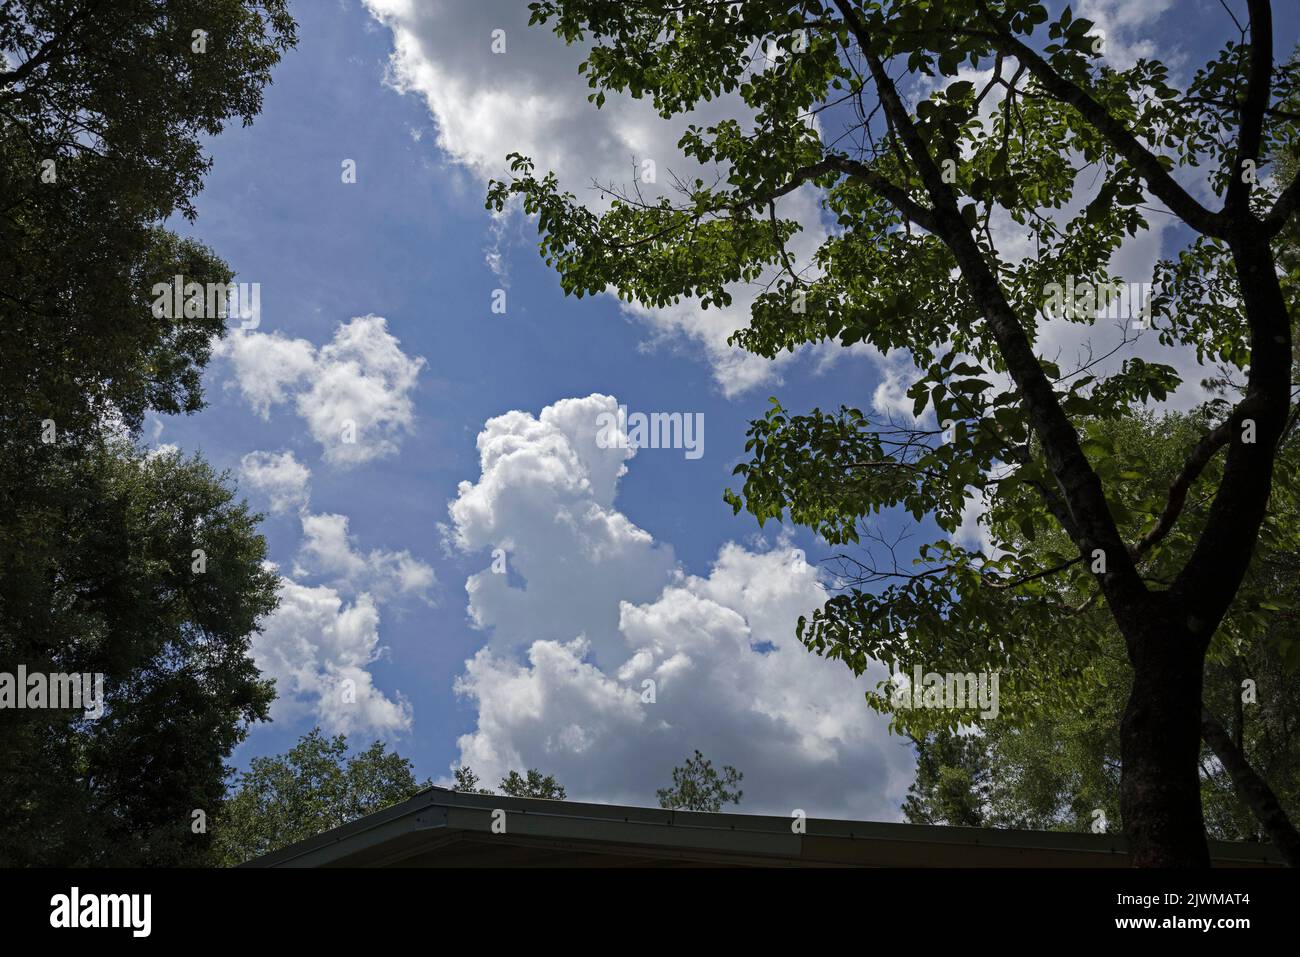 Beautiful summer clouds and skies framed by North Florida trees and vegetation. Stock Photo